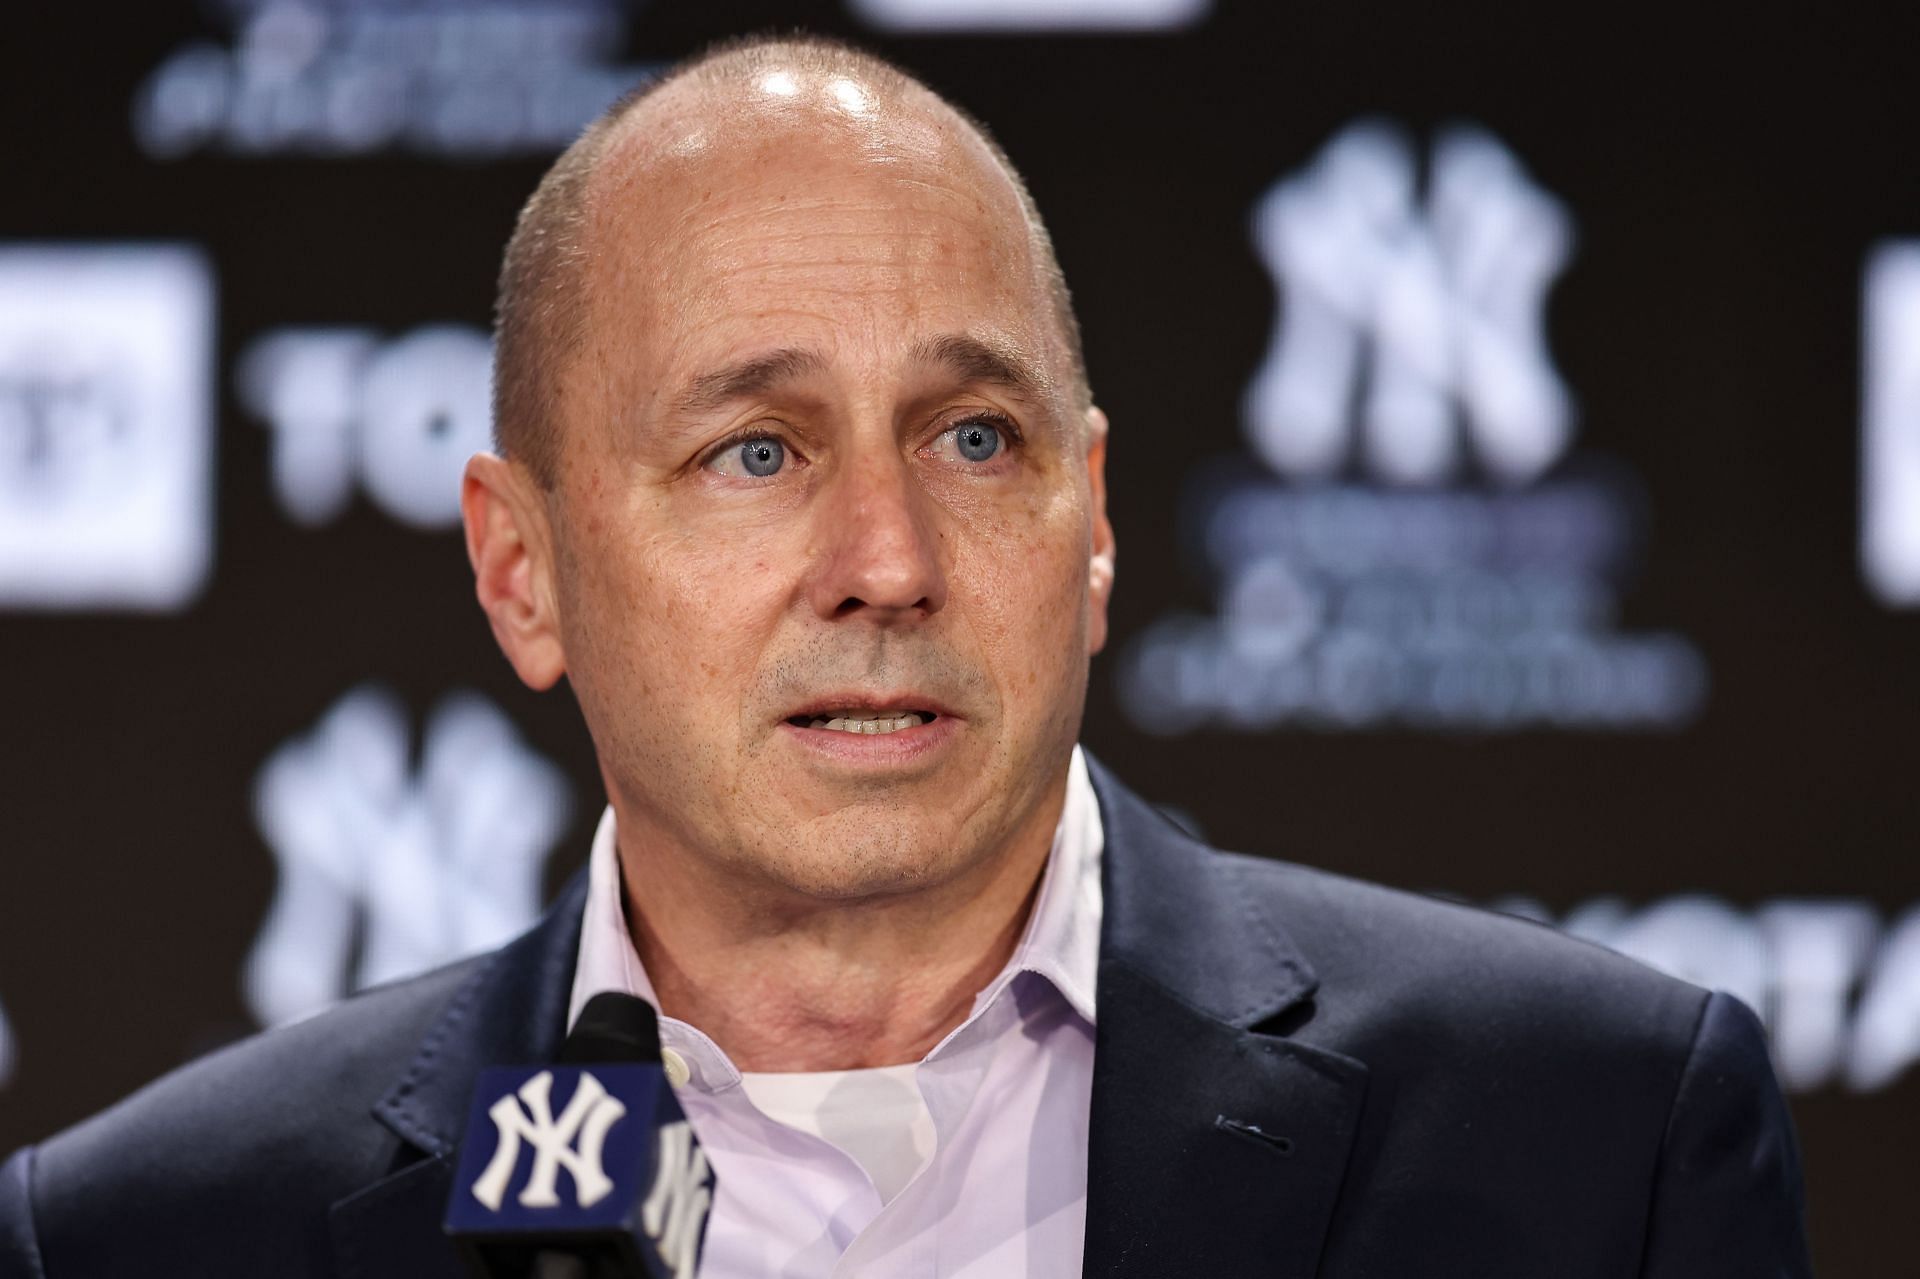 New York Yankee general manager Brian Cashman speaks to the media during a news conference.